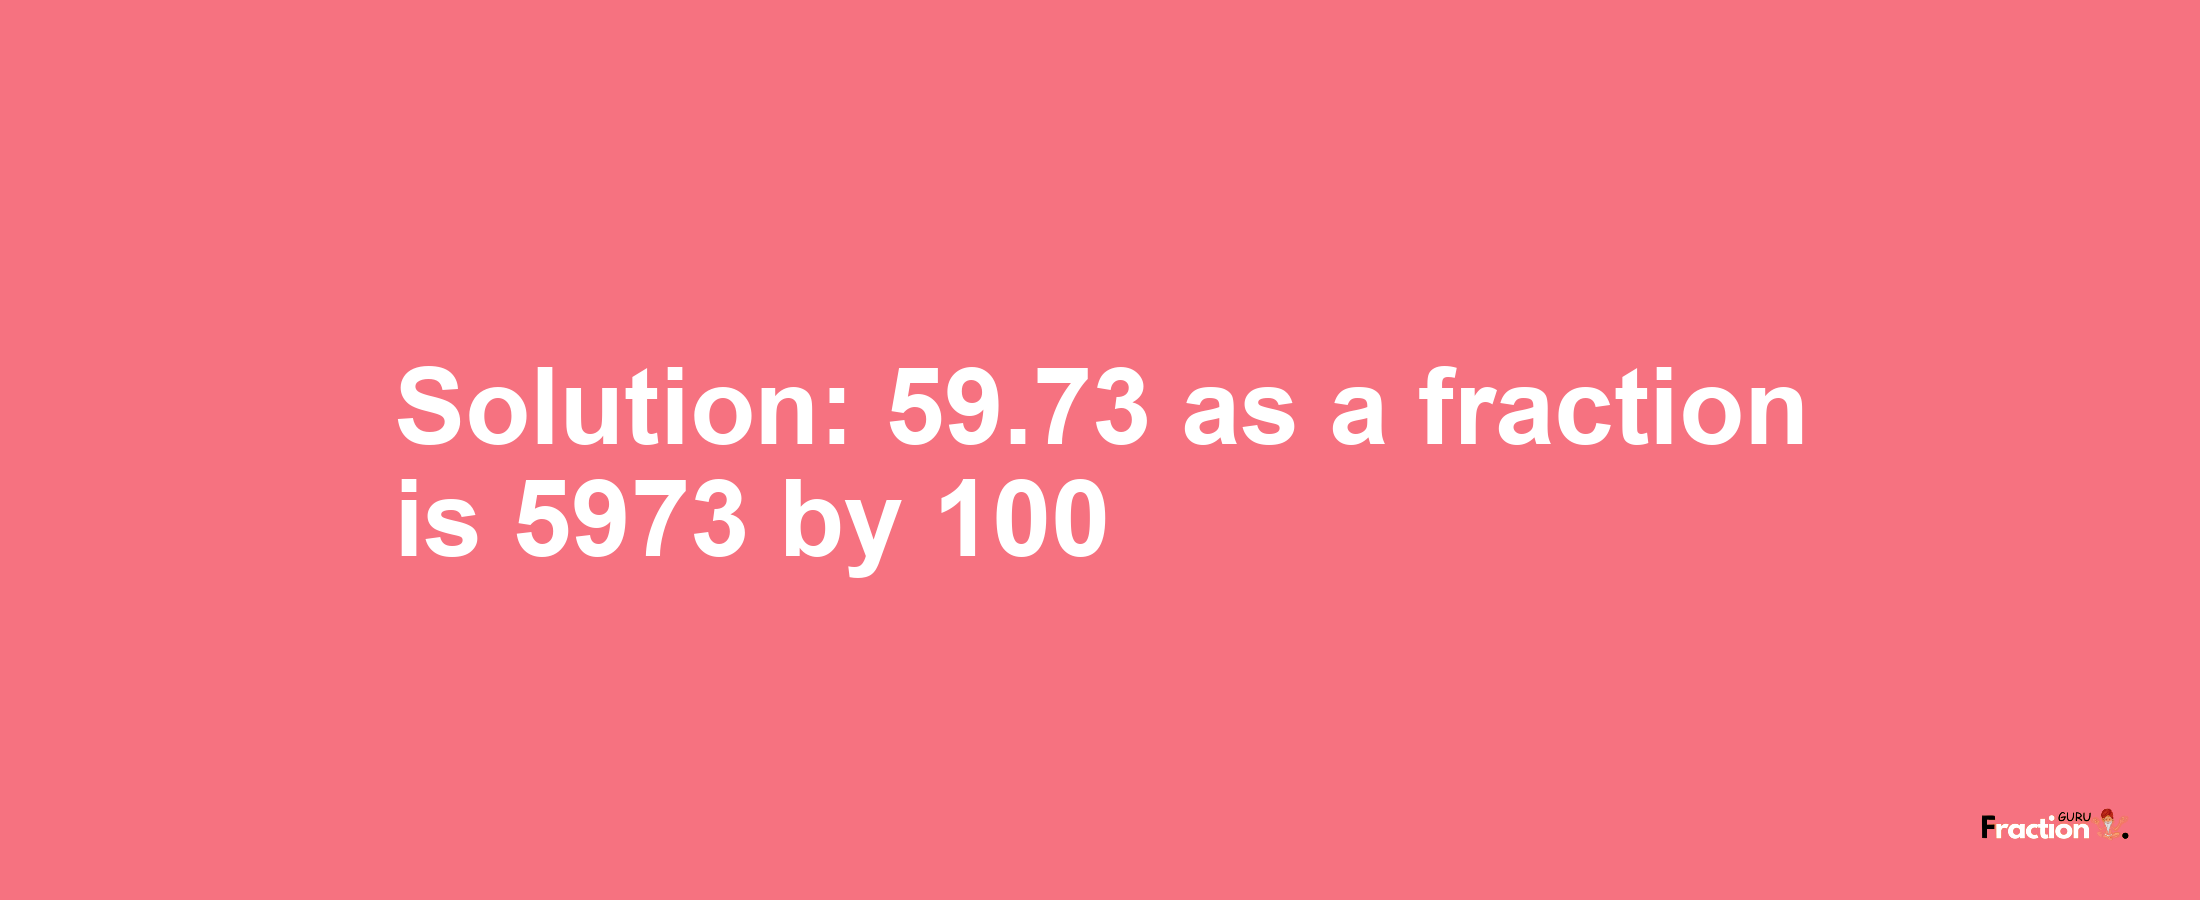 Solution:59.73 as a fraction is 5973/100